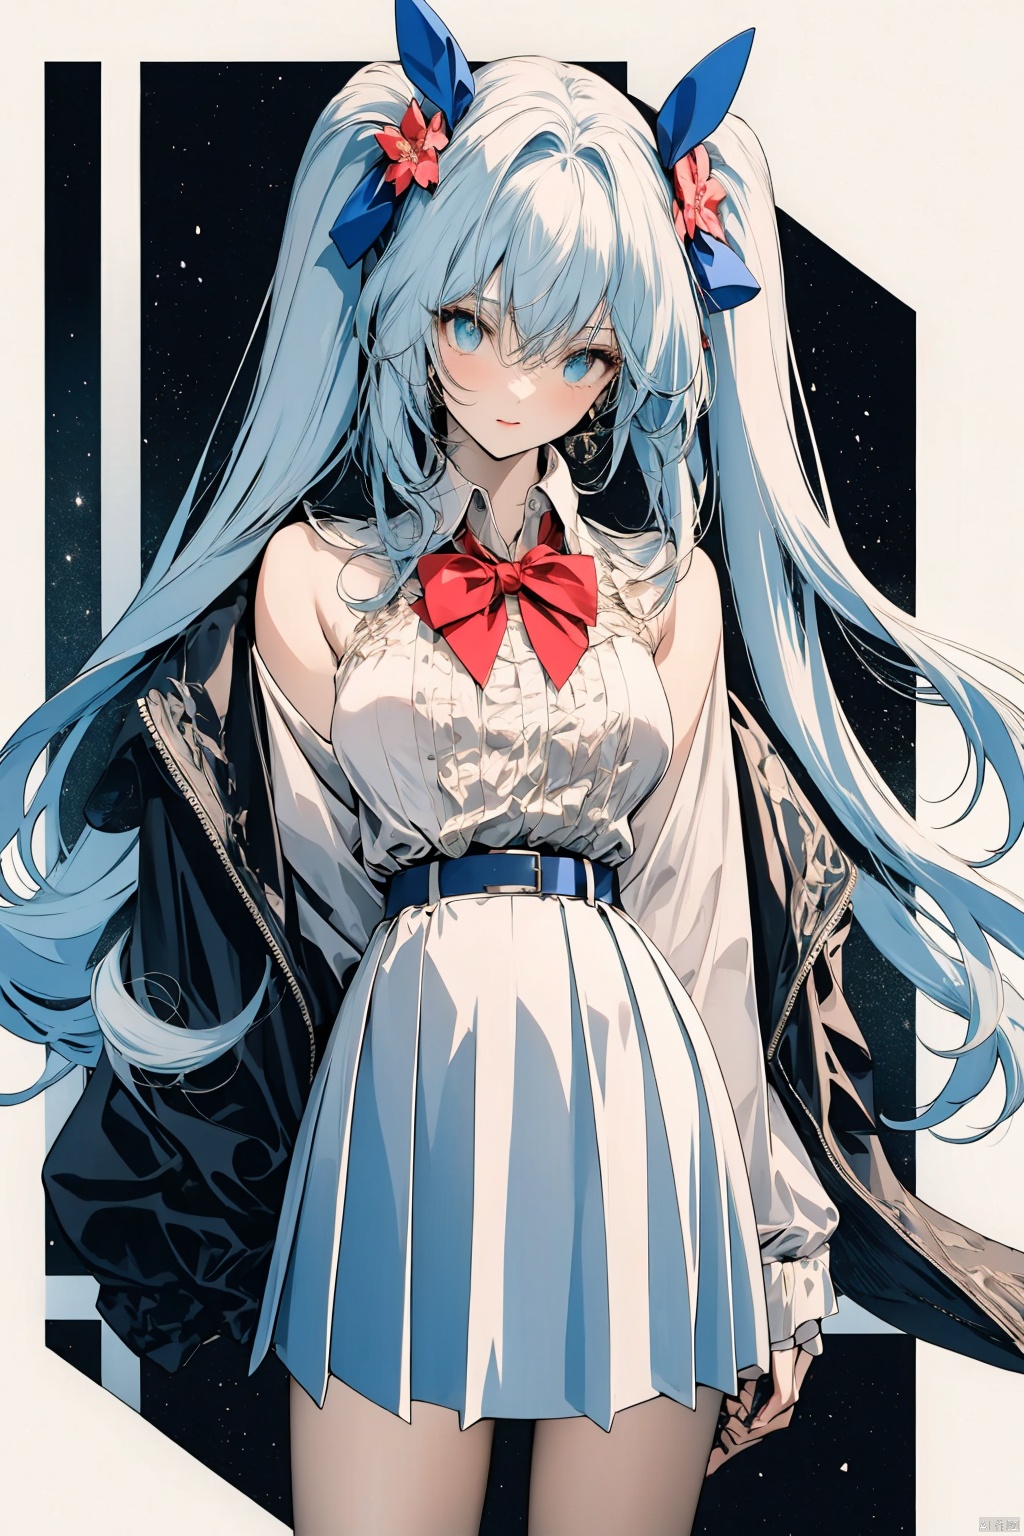  no cloth, cute girl，Long hair, light blue hair, pink streaks of hair, space bun hairstyle, flower hairpin, blue eyes, long-sleeve, button-up white shirt, a gray jacket with blue-green stripes, a red bow, dark blue-green pleated skirt, school background, add_detail:1, add_detail:0, add_detail:0.5